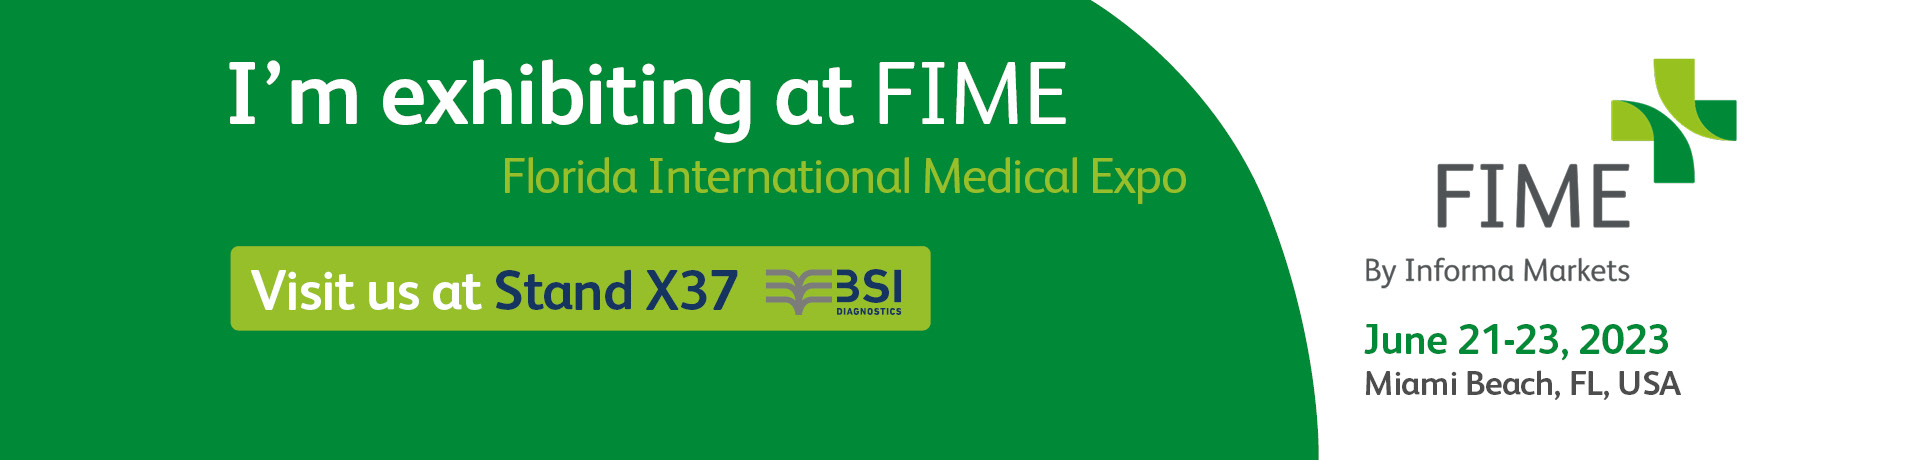 BSI attending the 2023 FIME (Florida International Medical Expo) edition